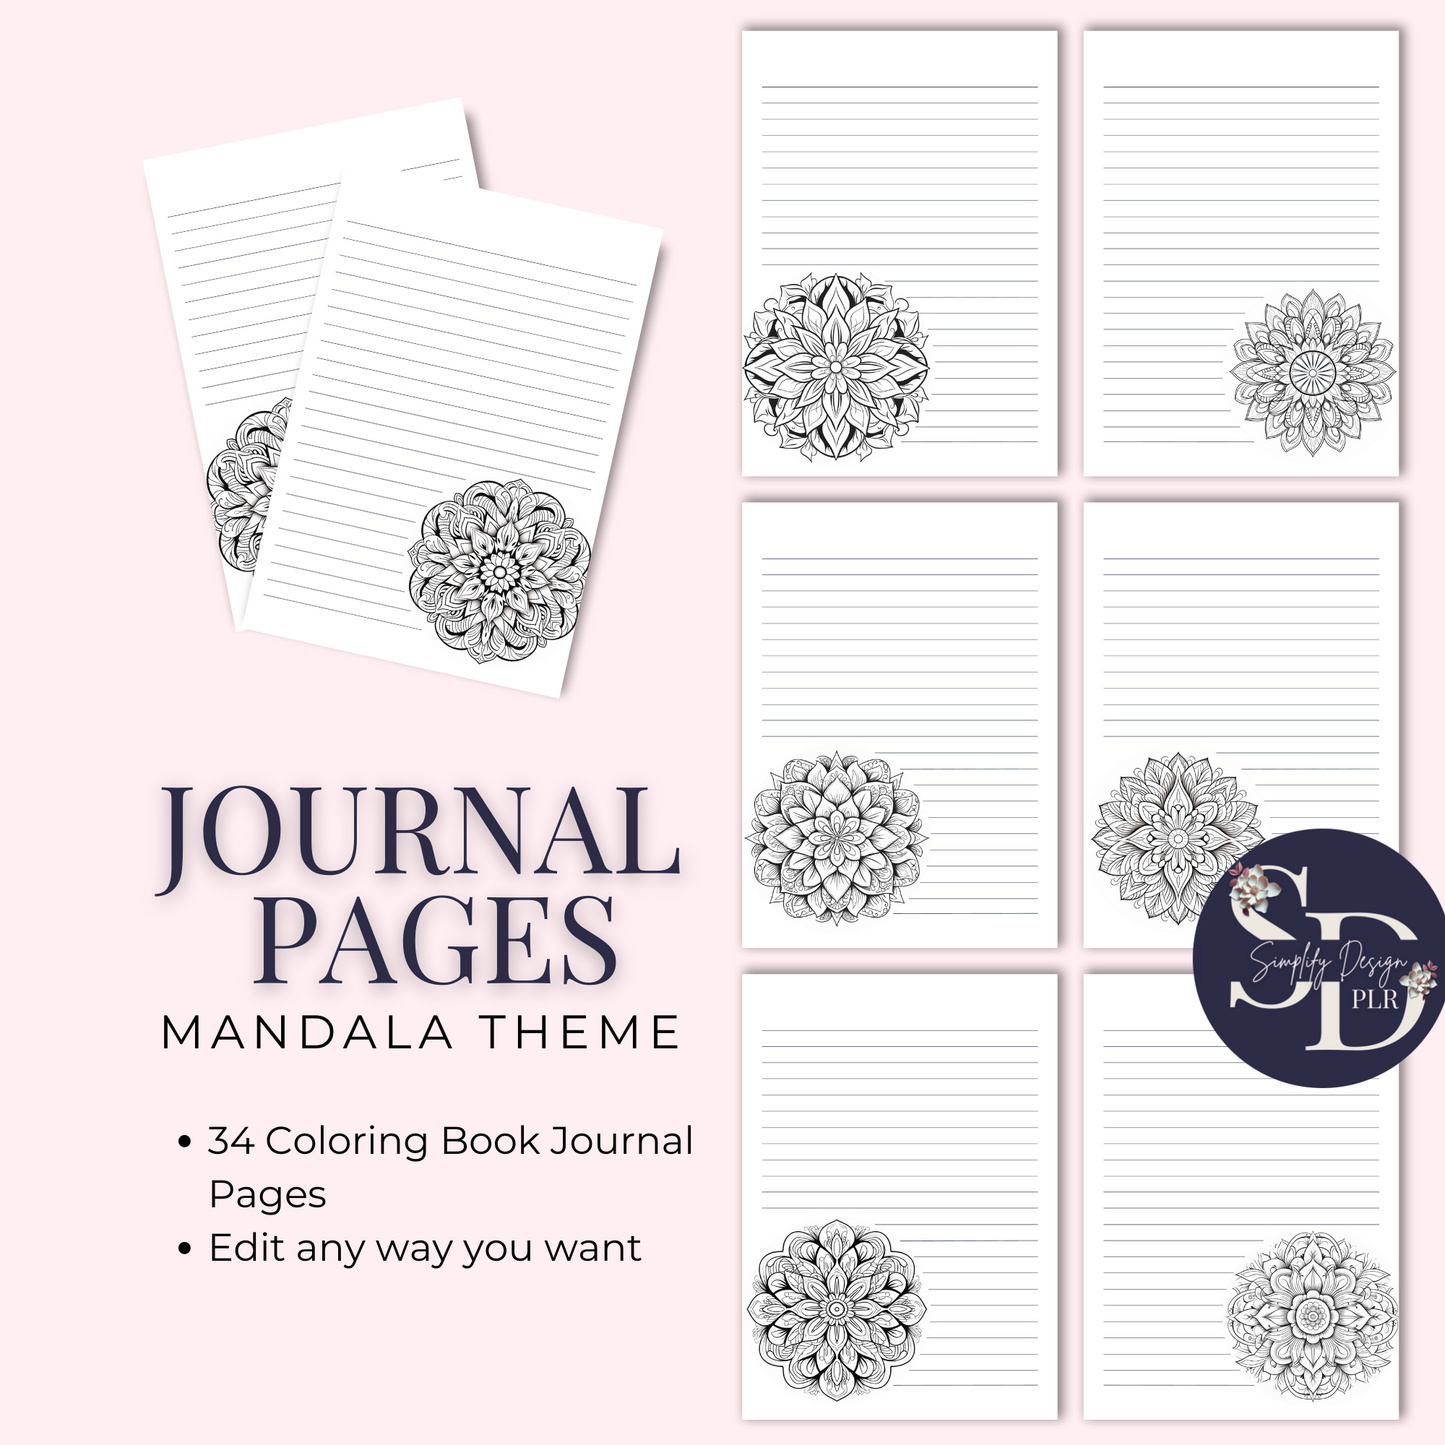 Pack of Pages: Mandala